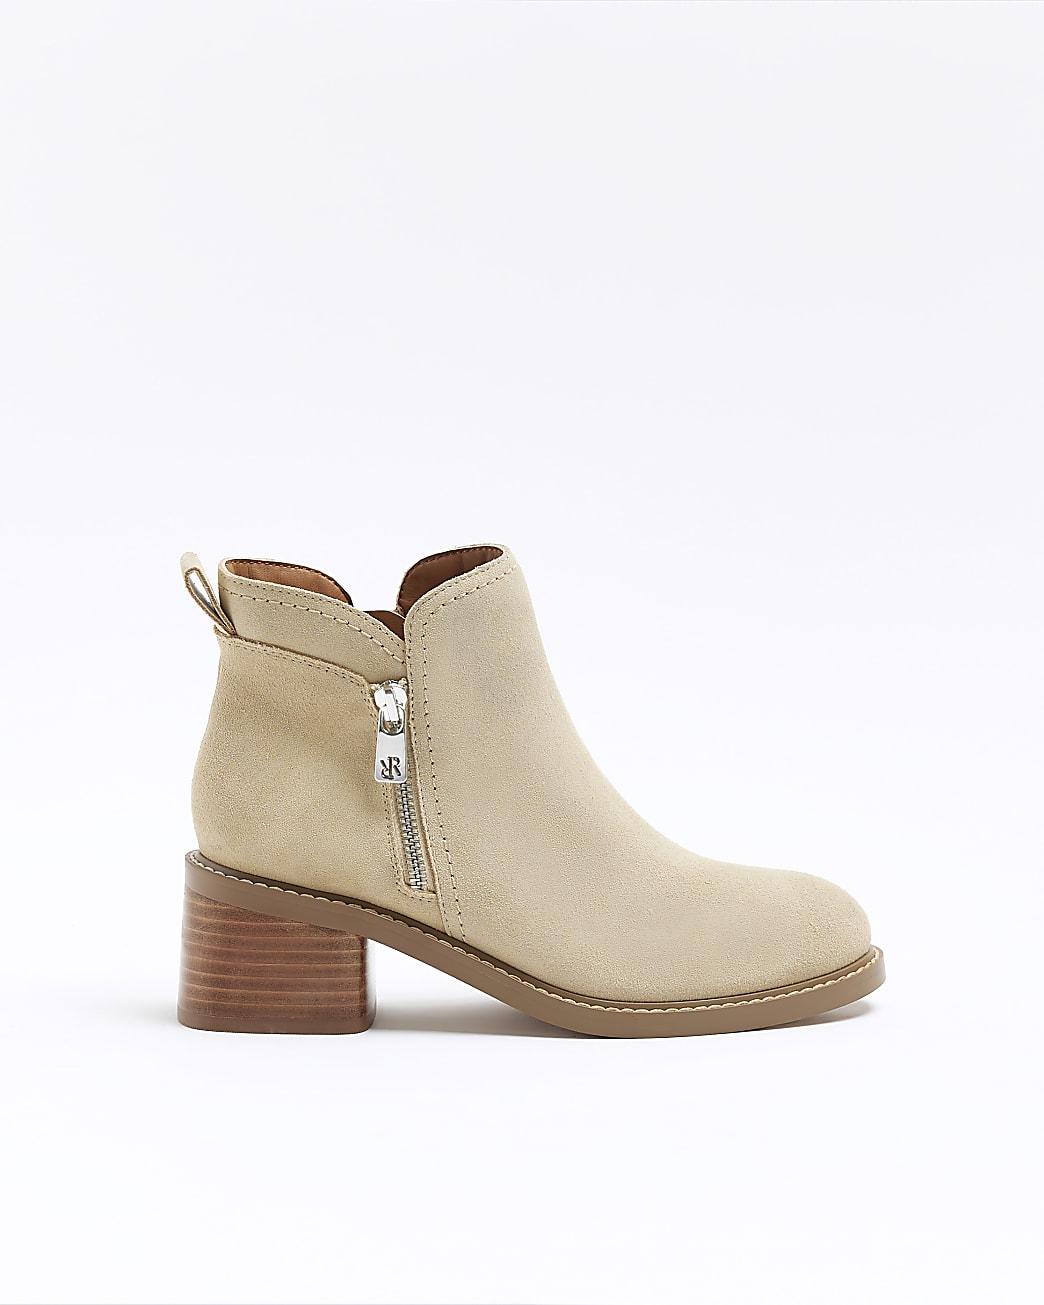 River Island Stone Suede Heeled Ankle Boots in White | Lyst